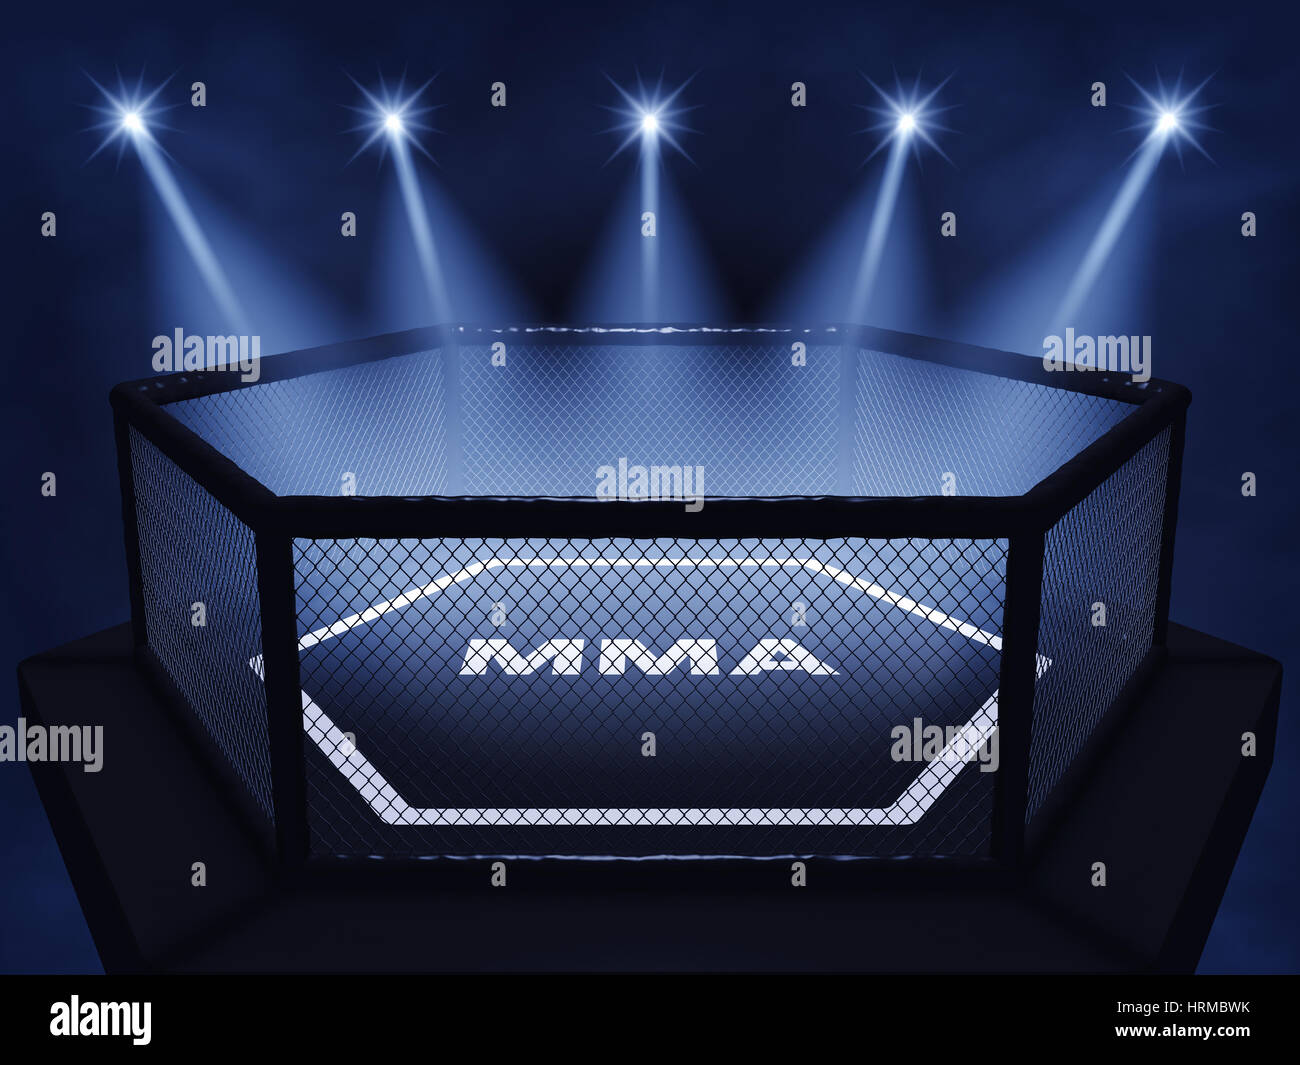 MMA cage lit by spotlights , Mixed martial arts fight night event Stock  Photo - Alamy